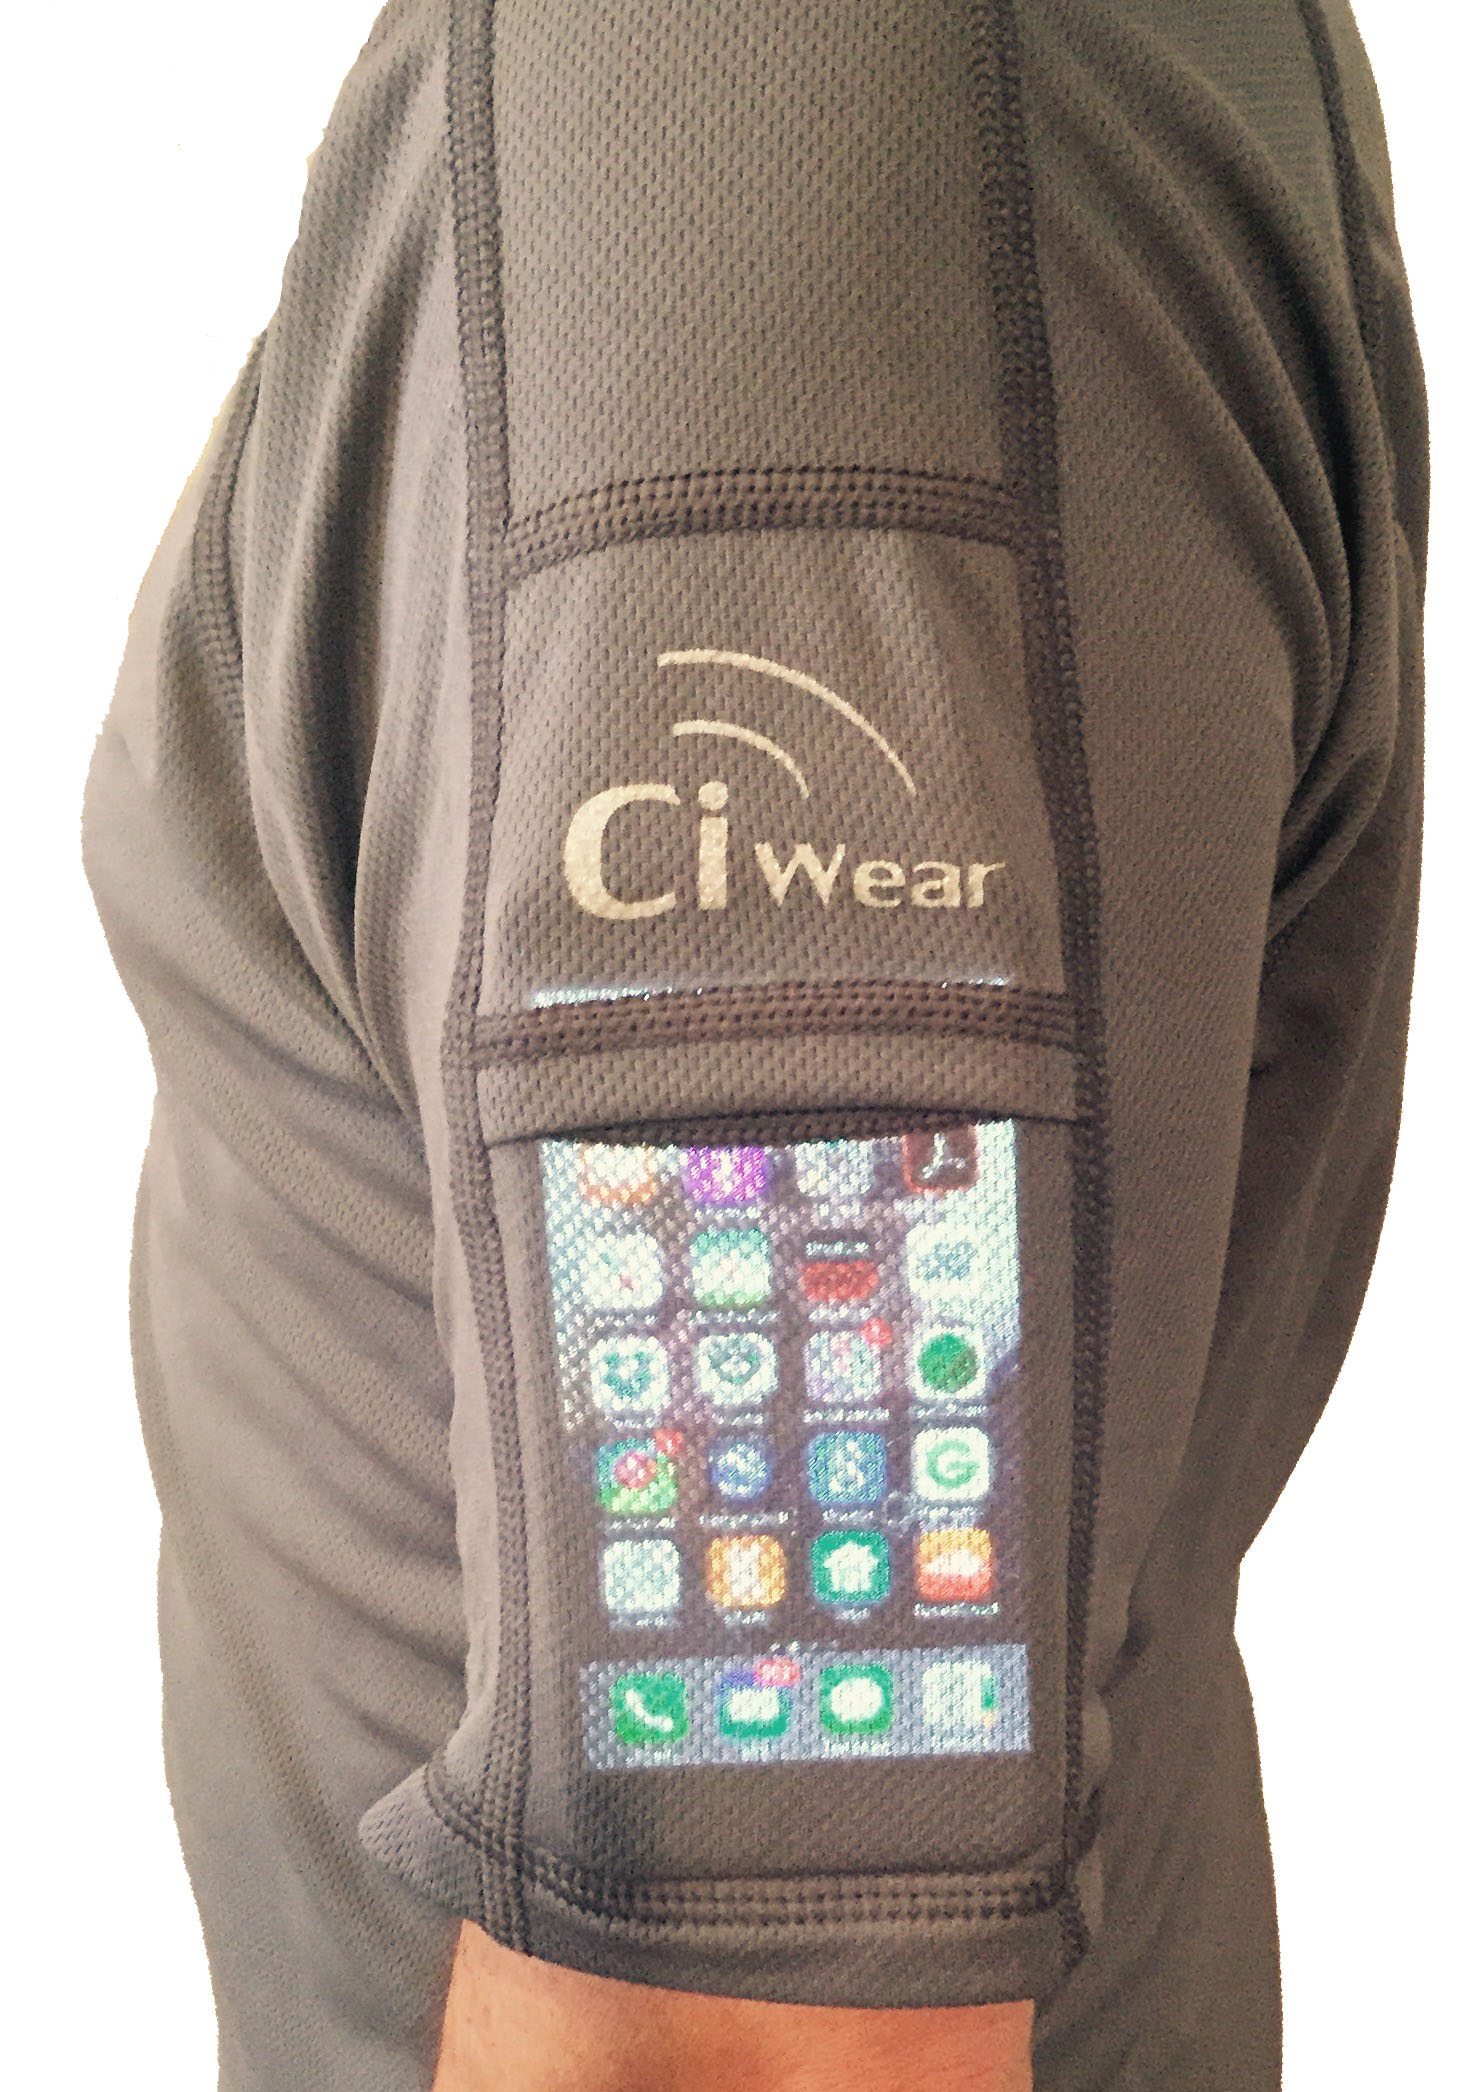 All kind of devices fit in sleeve pockets